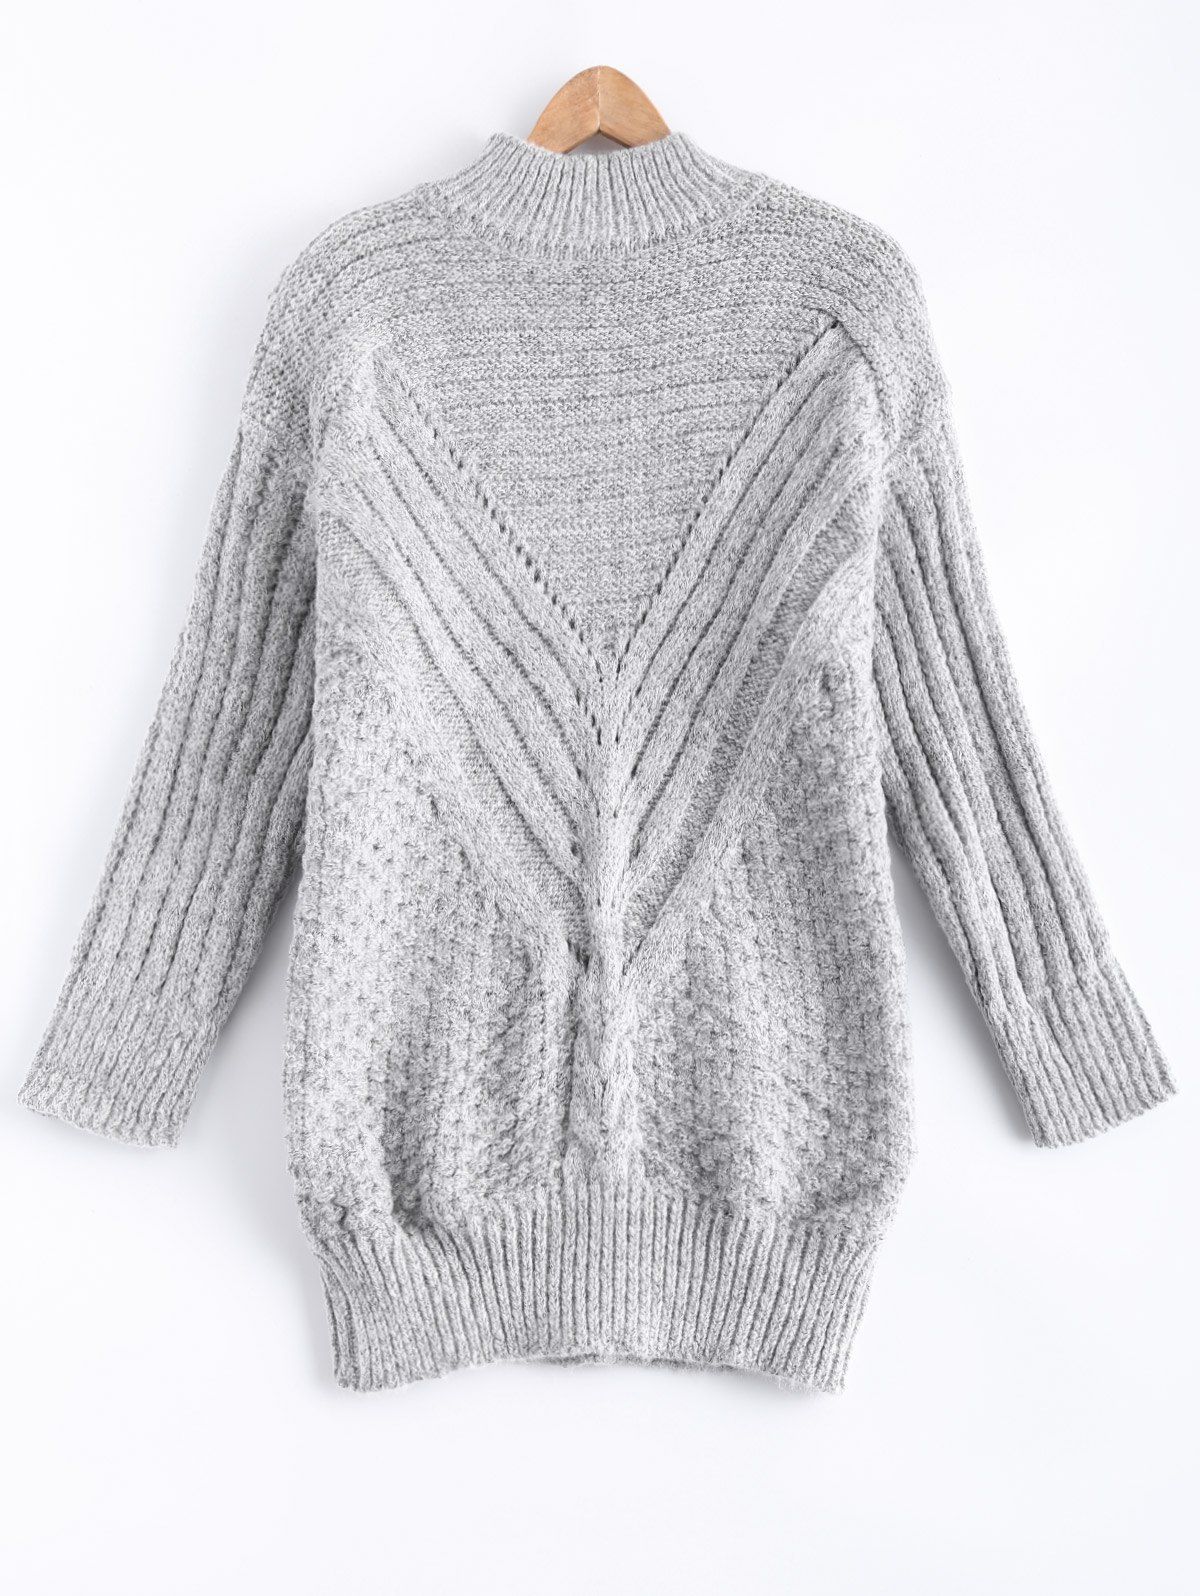 Drop Shoulder Textured Long Sweater - LIGHT GRAY ONE SIZE